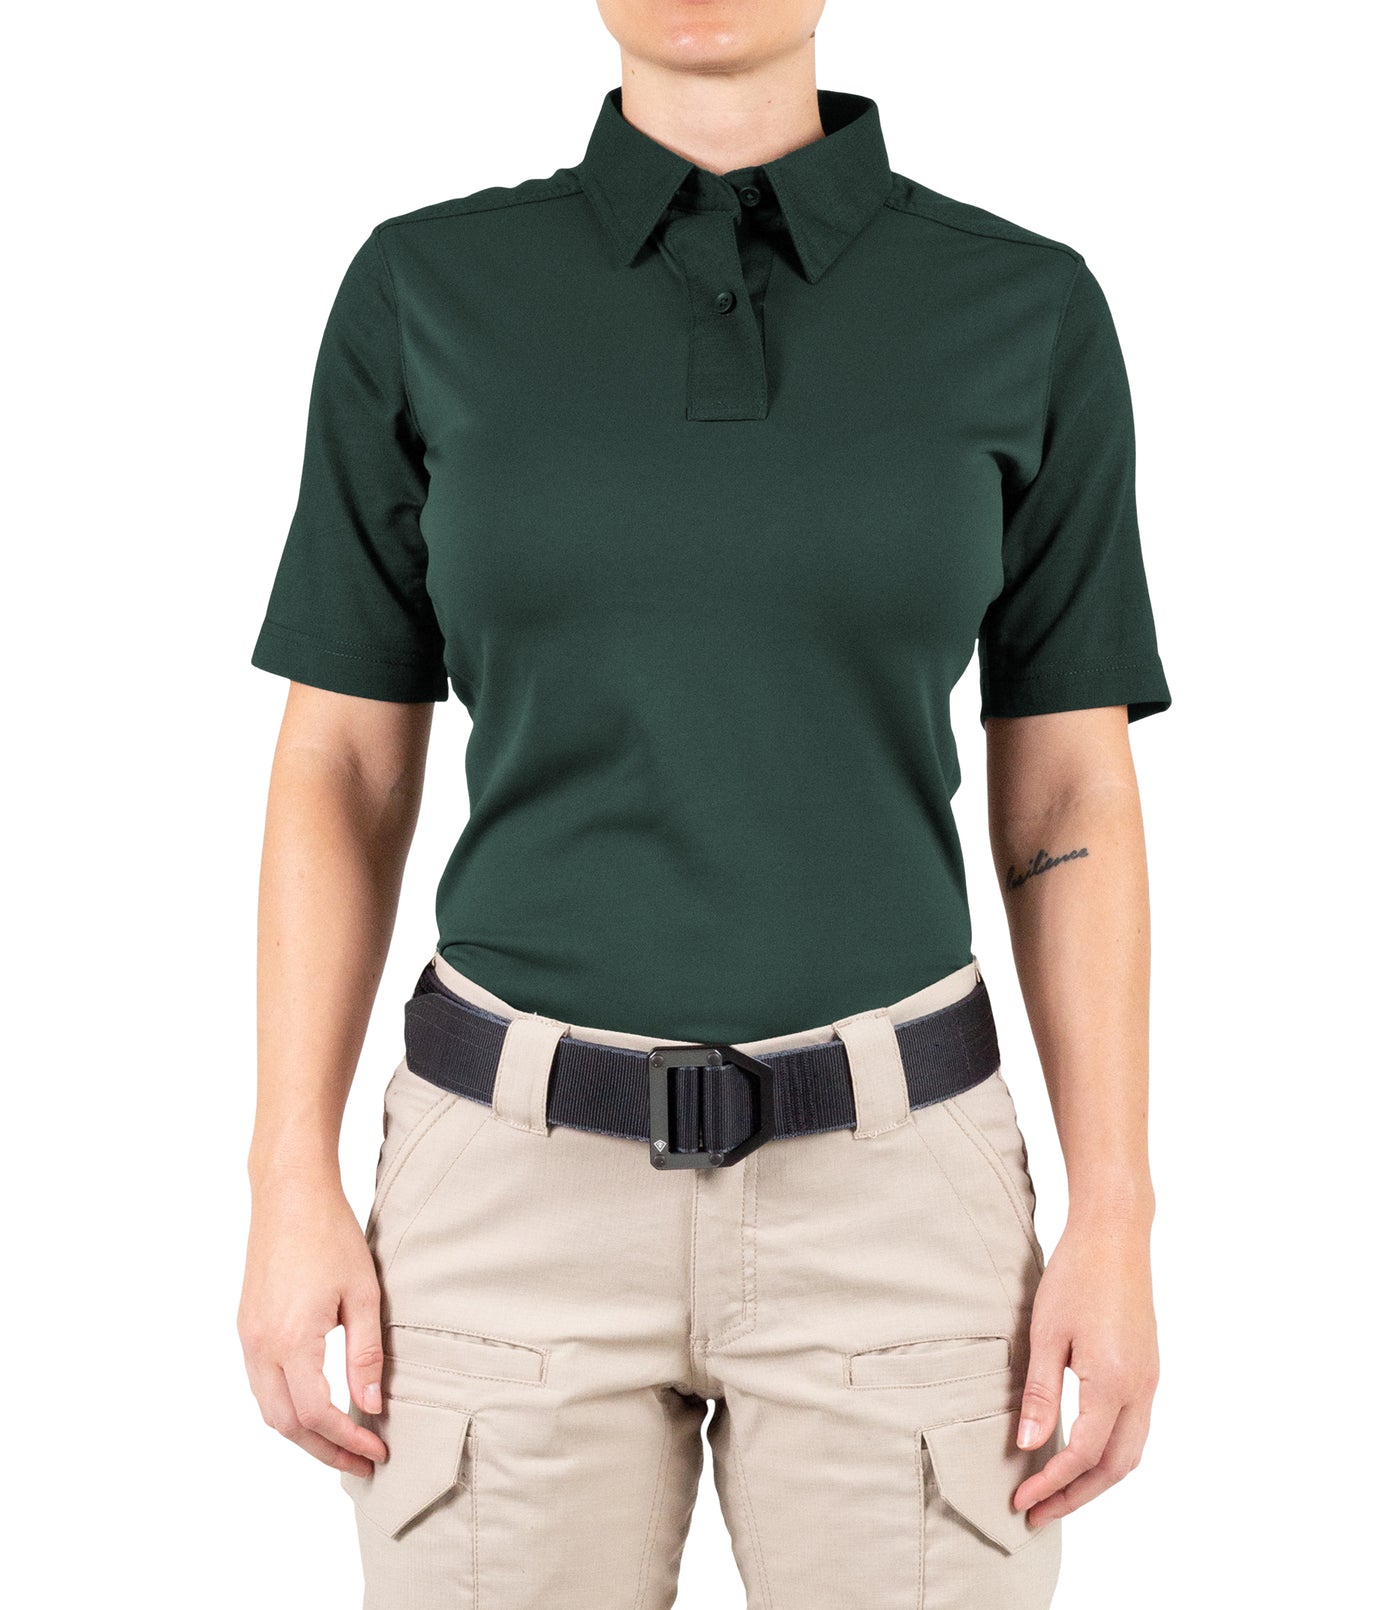 Front of Women's V2 Pro Performance Short Sleeve Shirt in Spruce Green